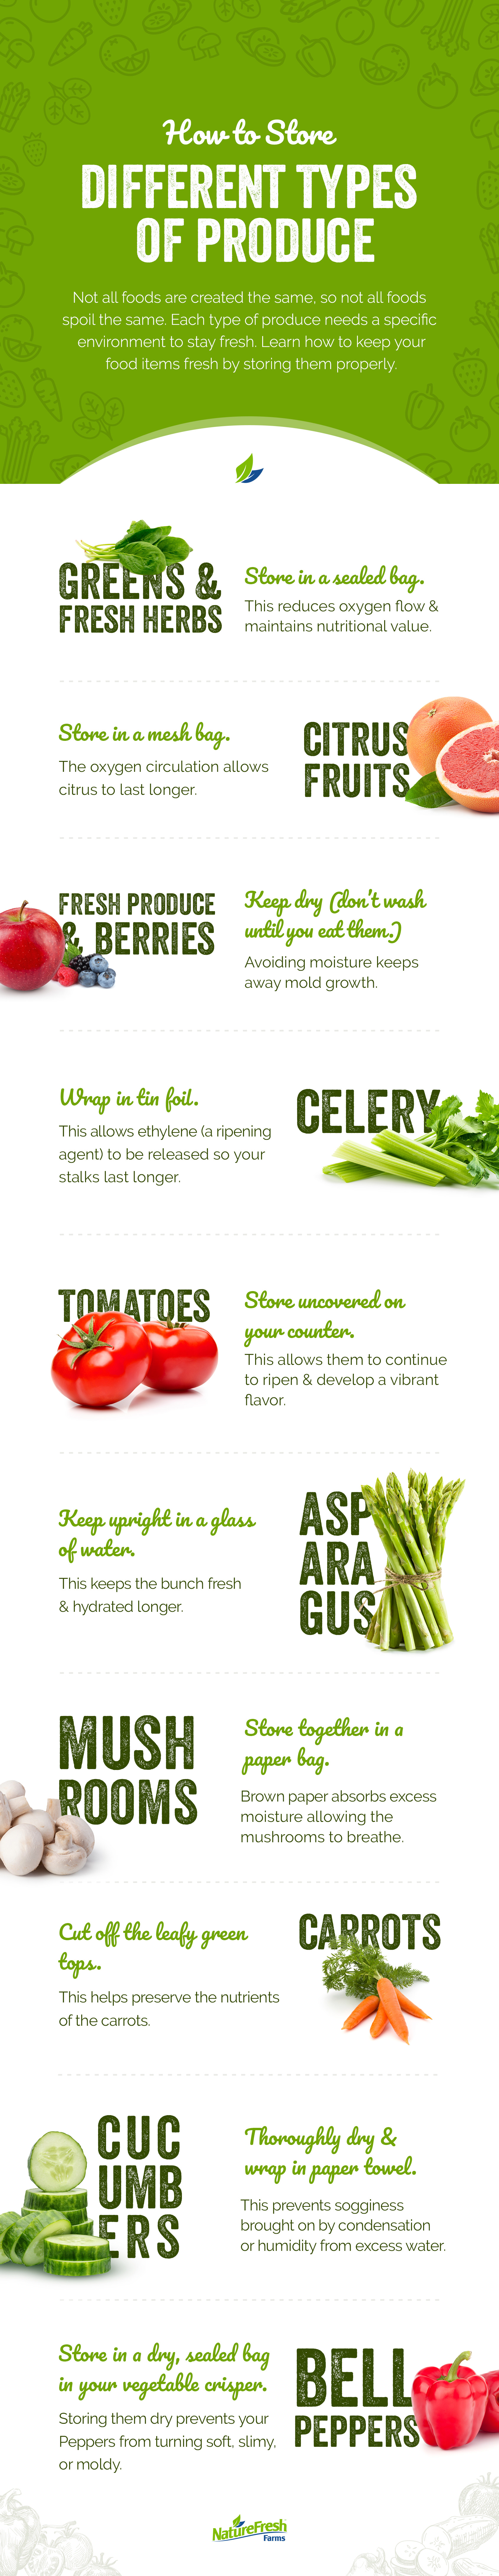 How to store different types of produce